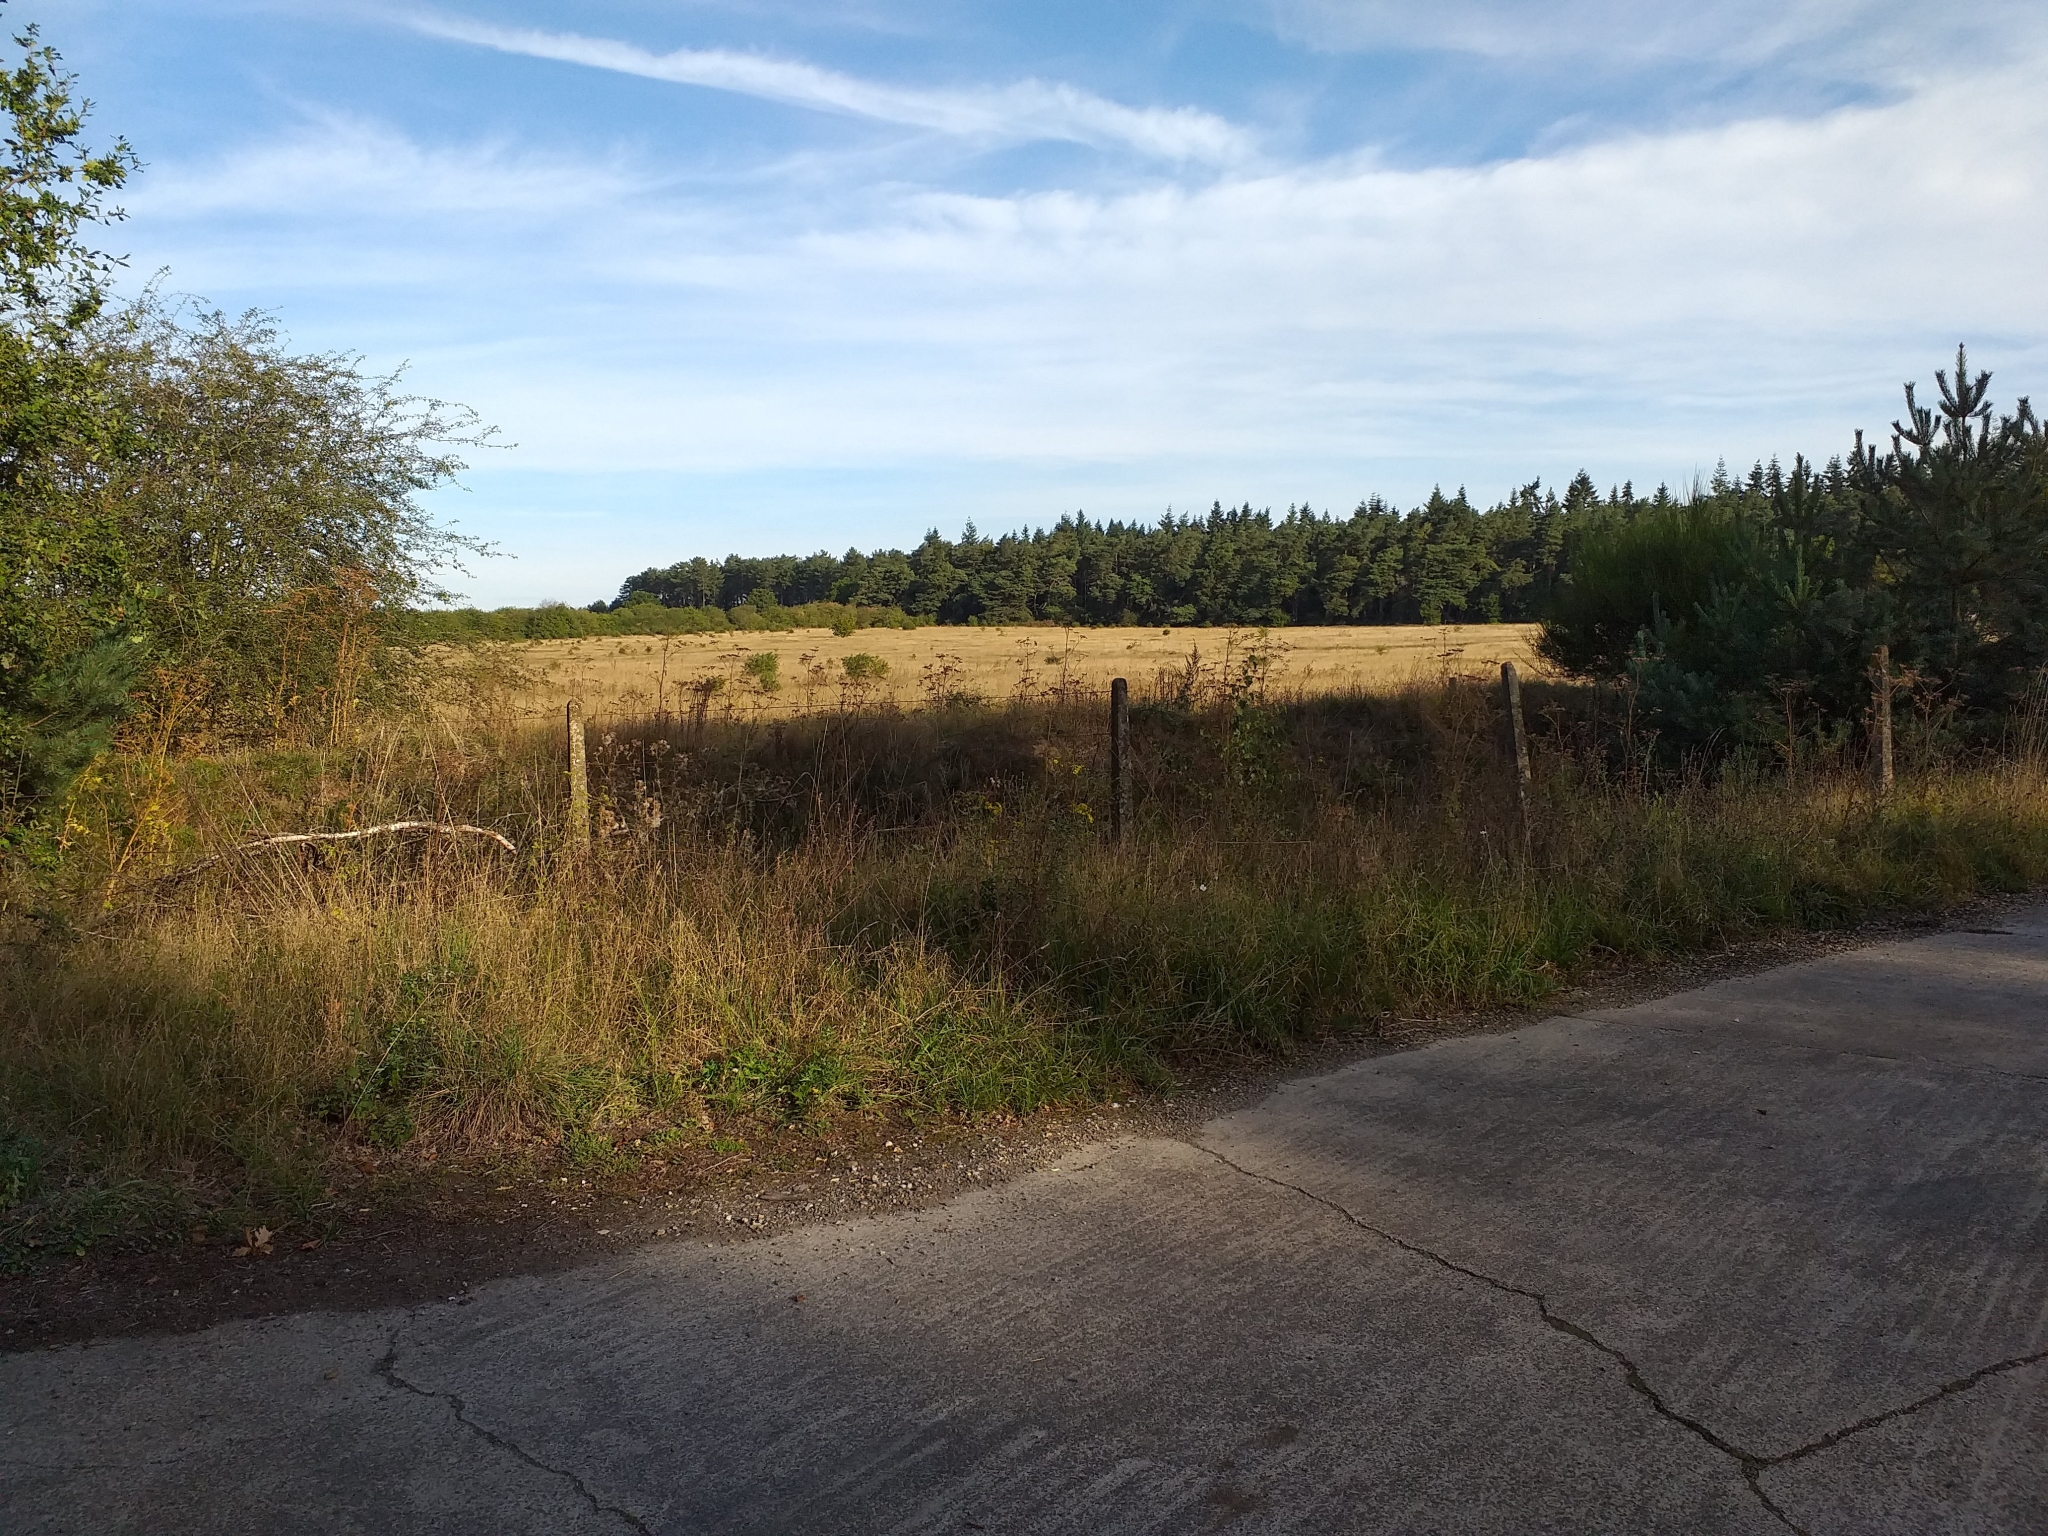 A photo from the FoTF Conservation Event - September 2019 - Scrub Clearance at Cranwich Camp : A view looking out from Cranwich Camp